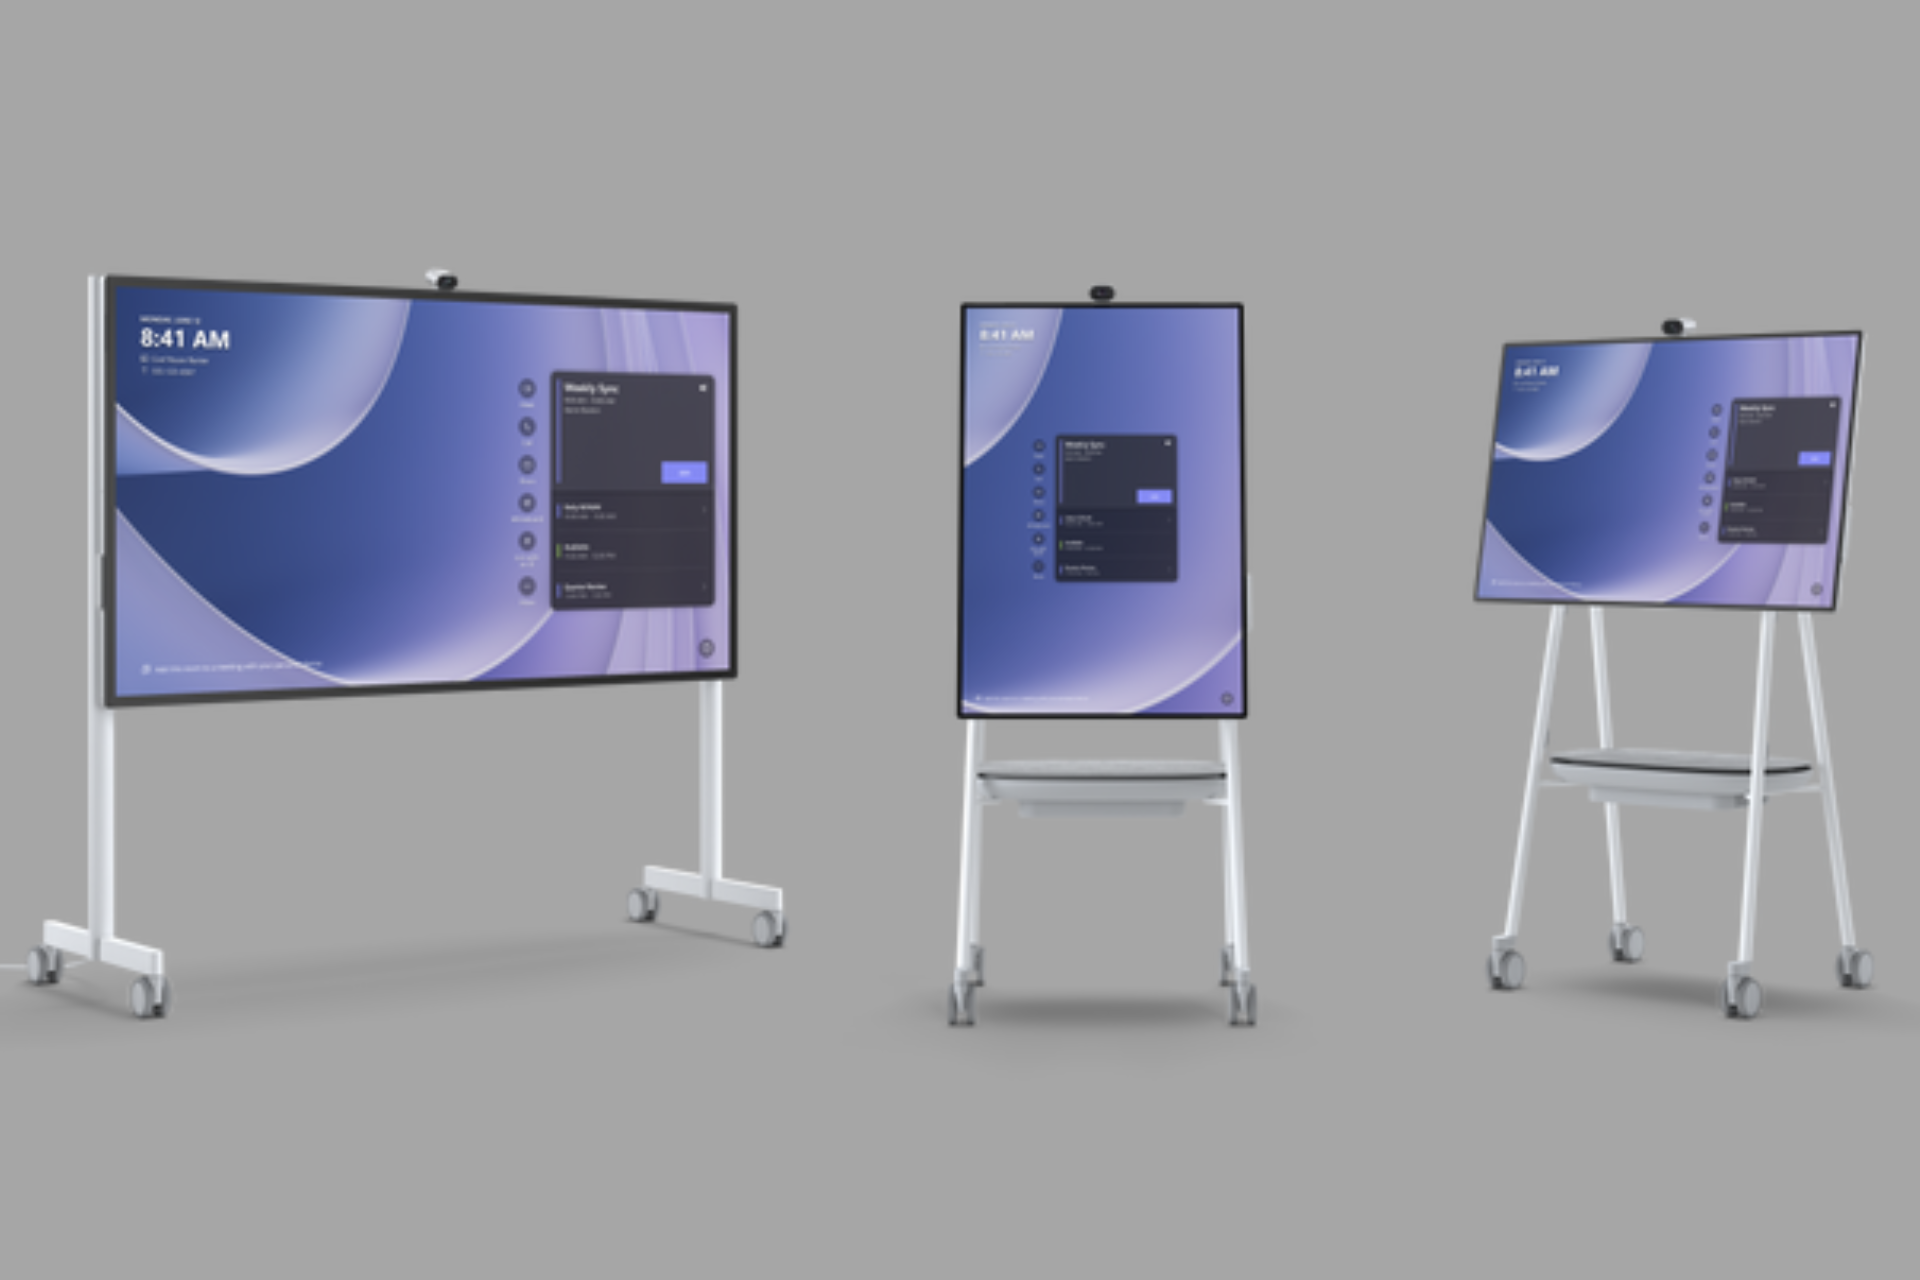 Microsoft Surface Hub 3: Who is it for and why?